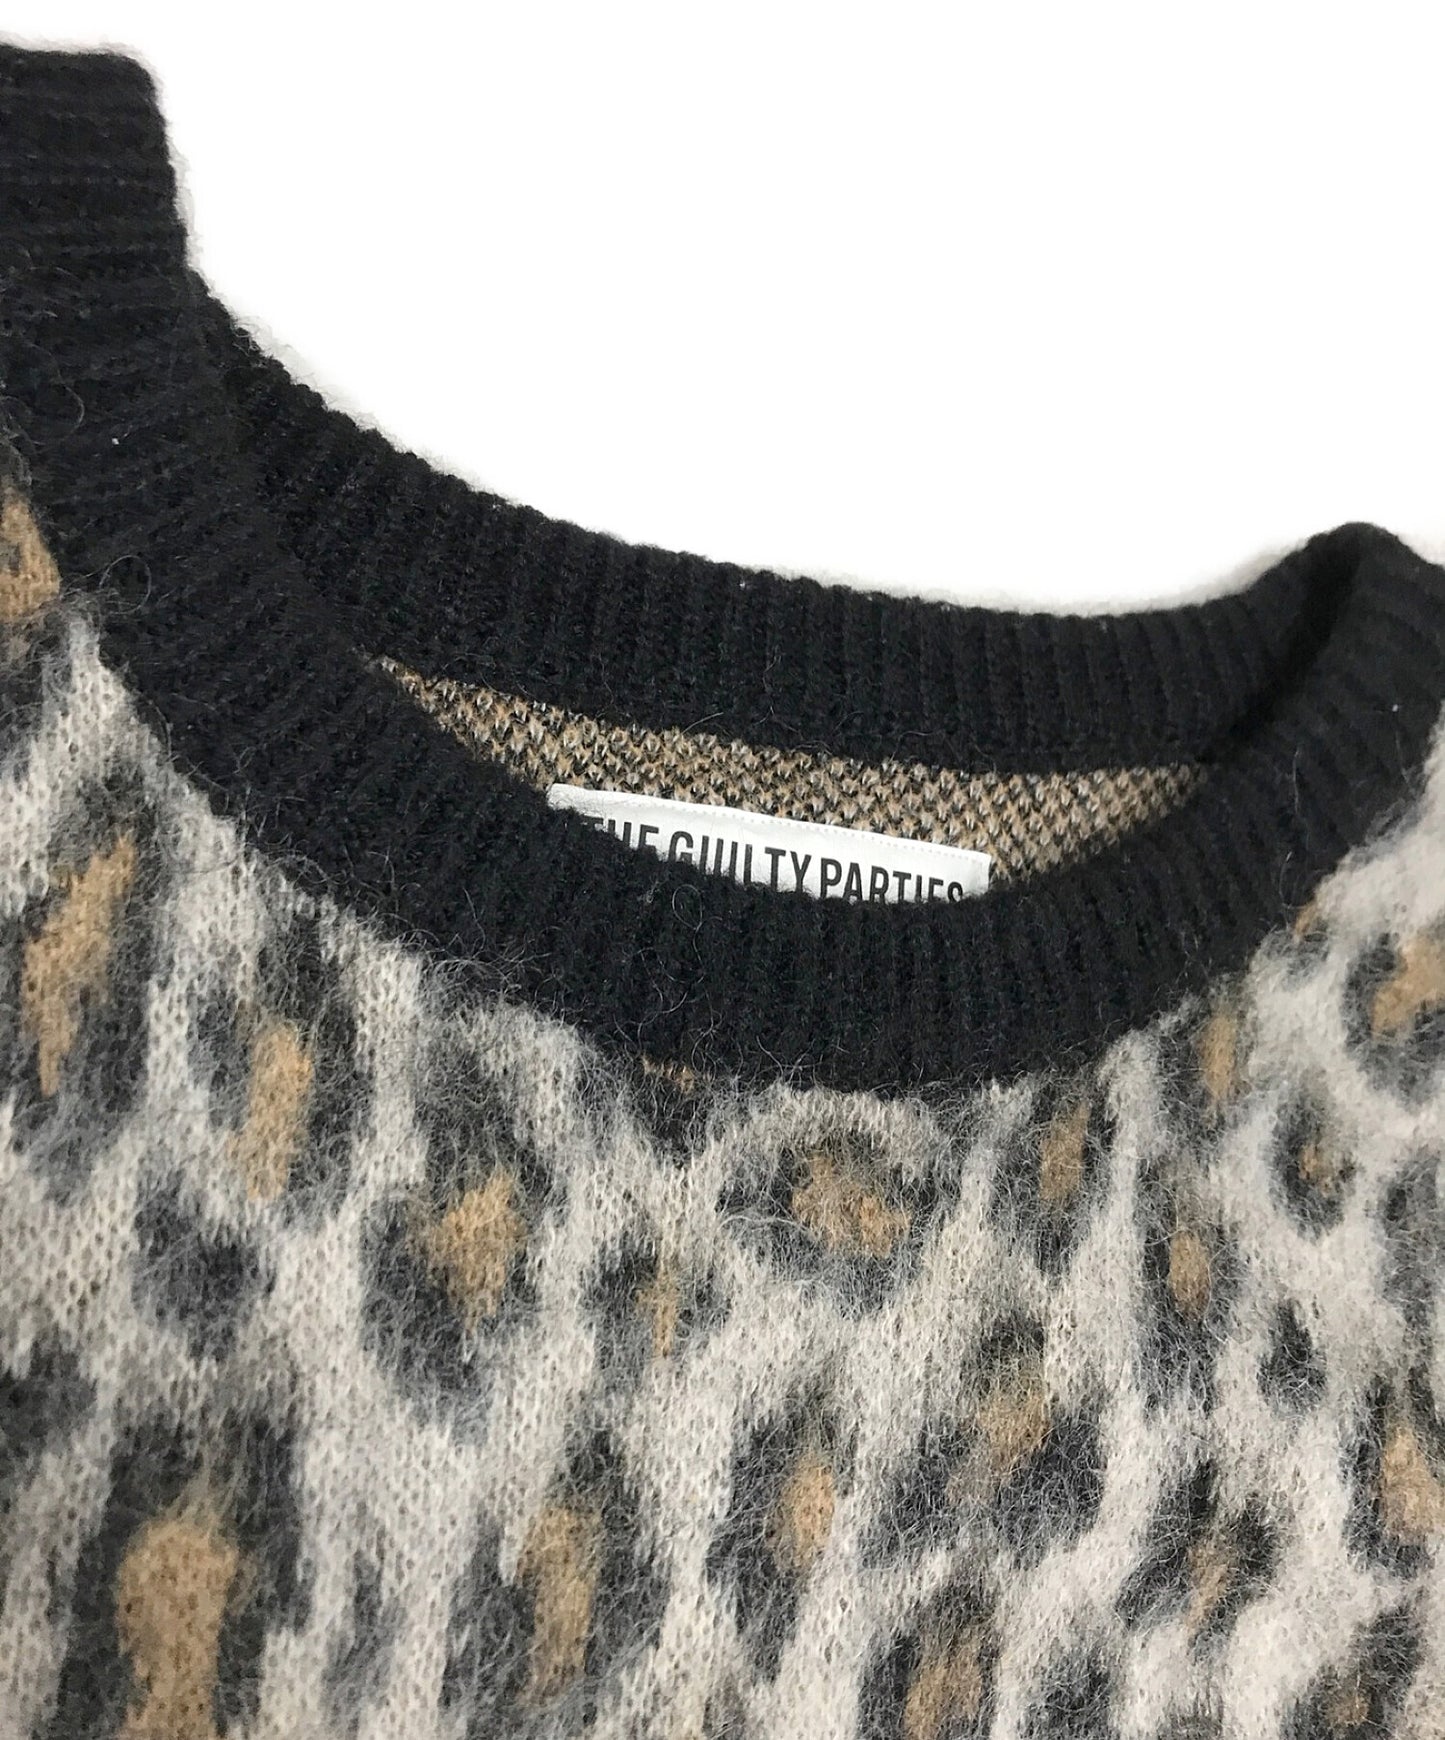 [Pre-owned] WACKO MARIA Leopard Mohair Knit